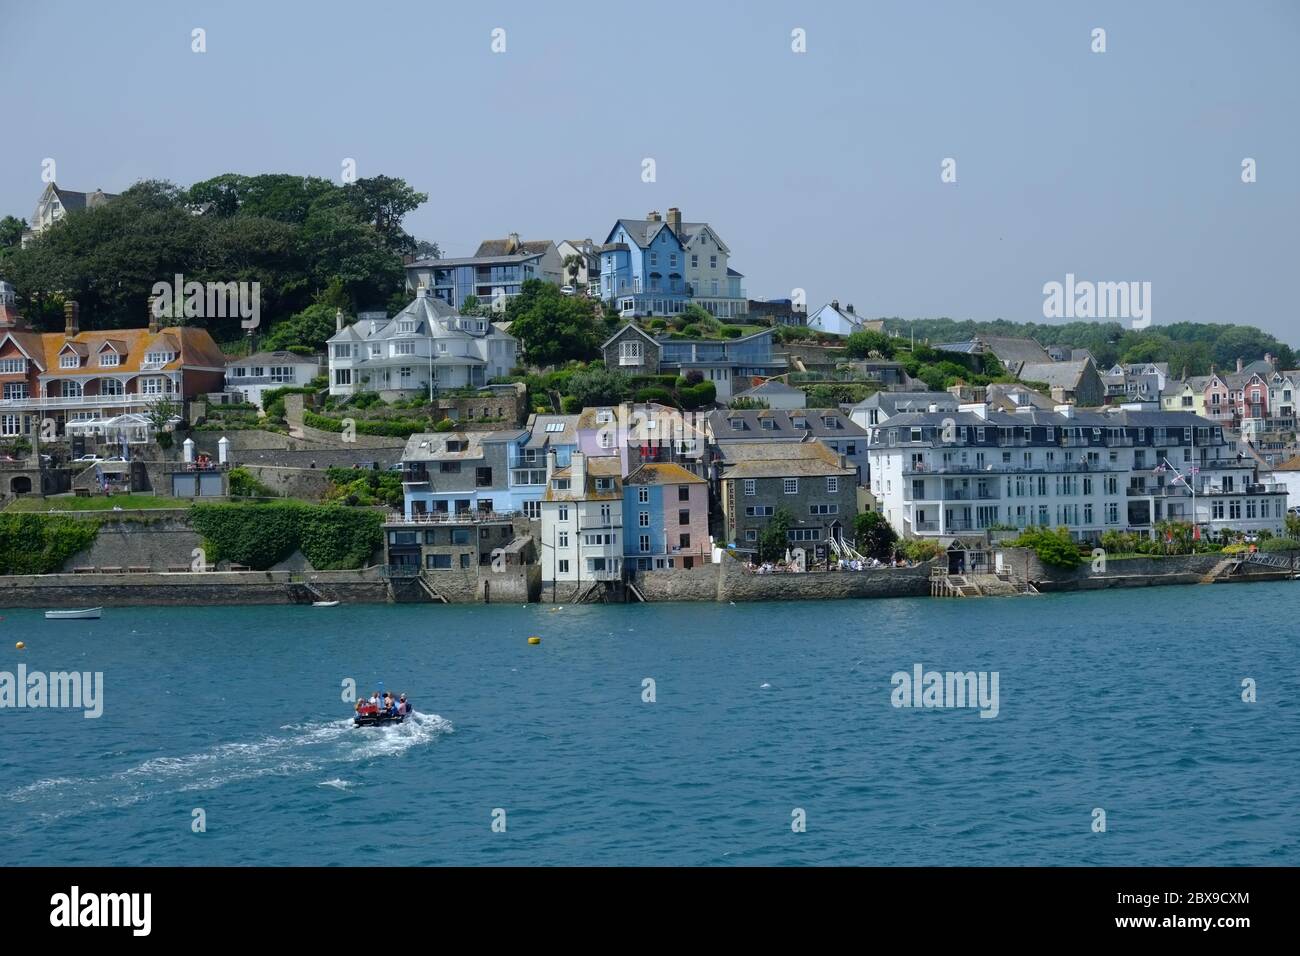 A general view of Salcombe Town, Estuary and Ferry Boat taken from East Portlemouth. Stock Photo